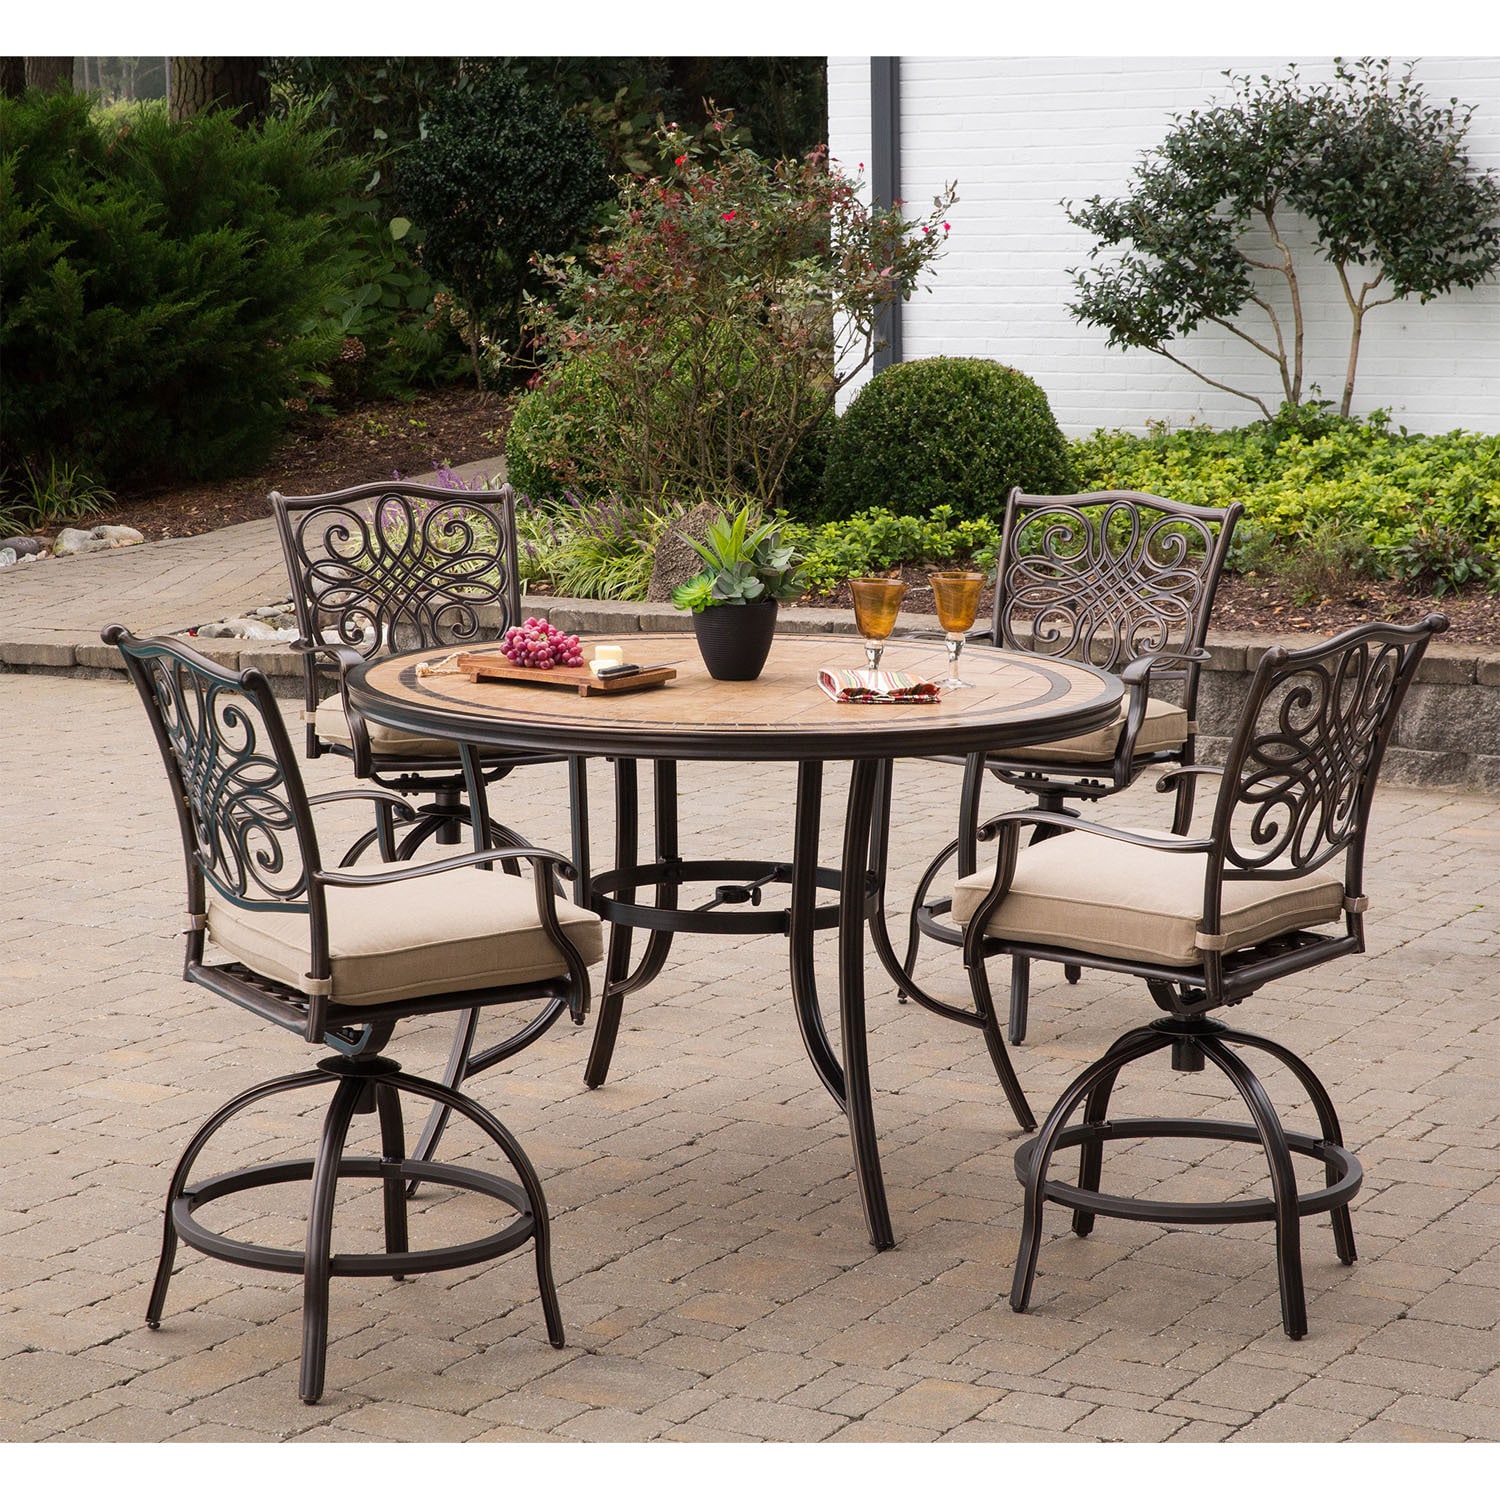 Monaco 5-piece High-dining Set In Tan With 6 Swivel Chairs And A 56 In. Tile-top Table